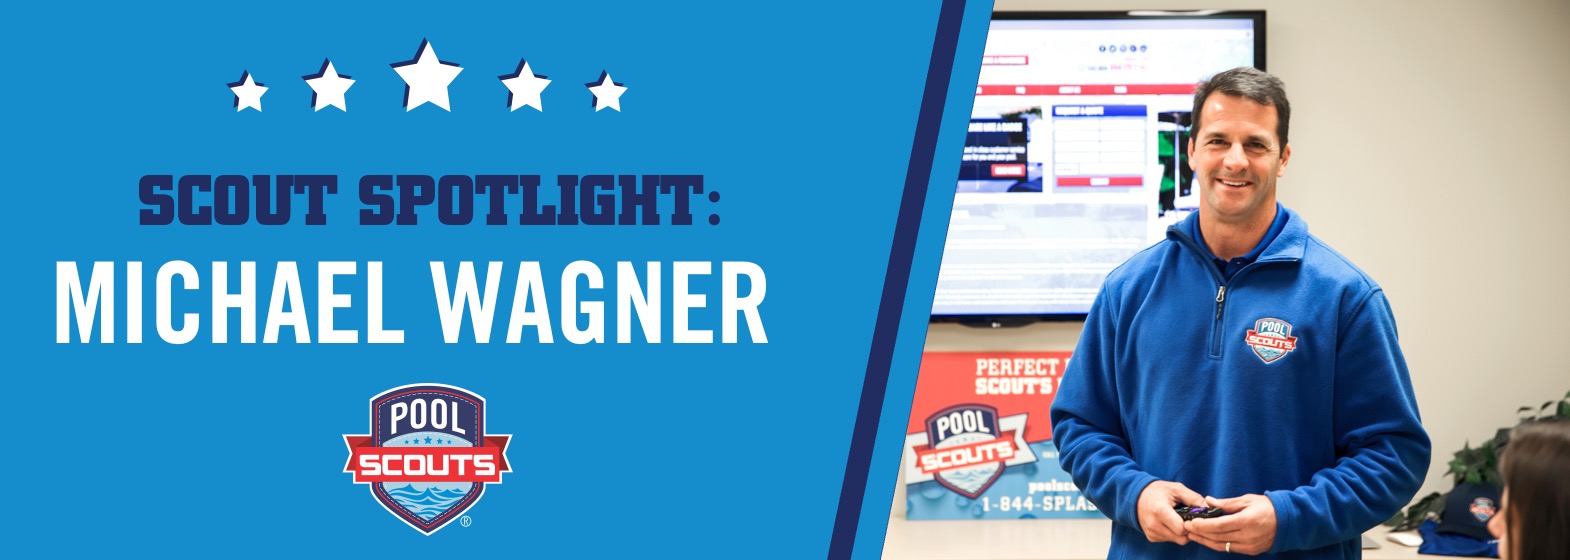 Image of Scout Spotlight: Michael Wagner